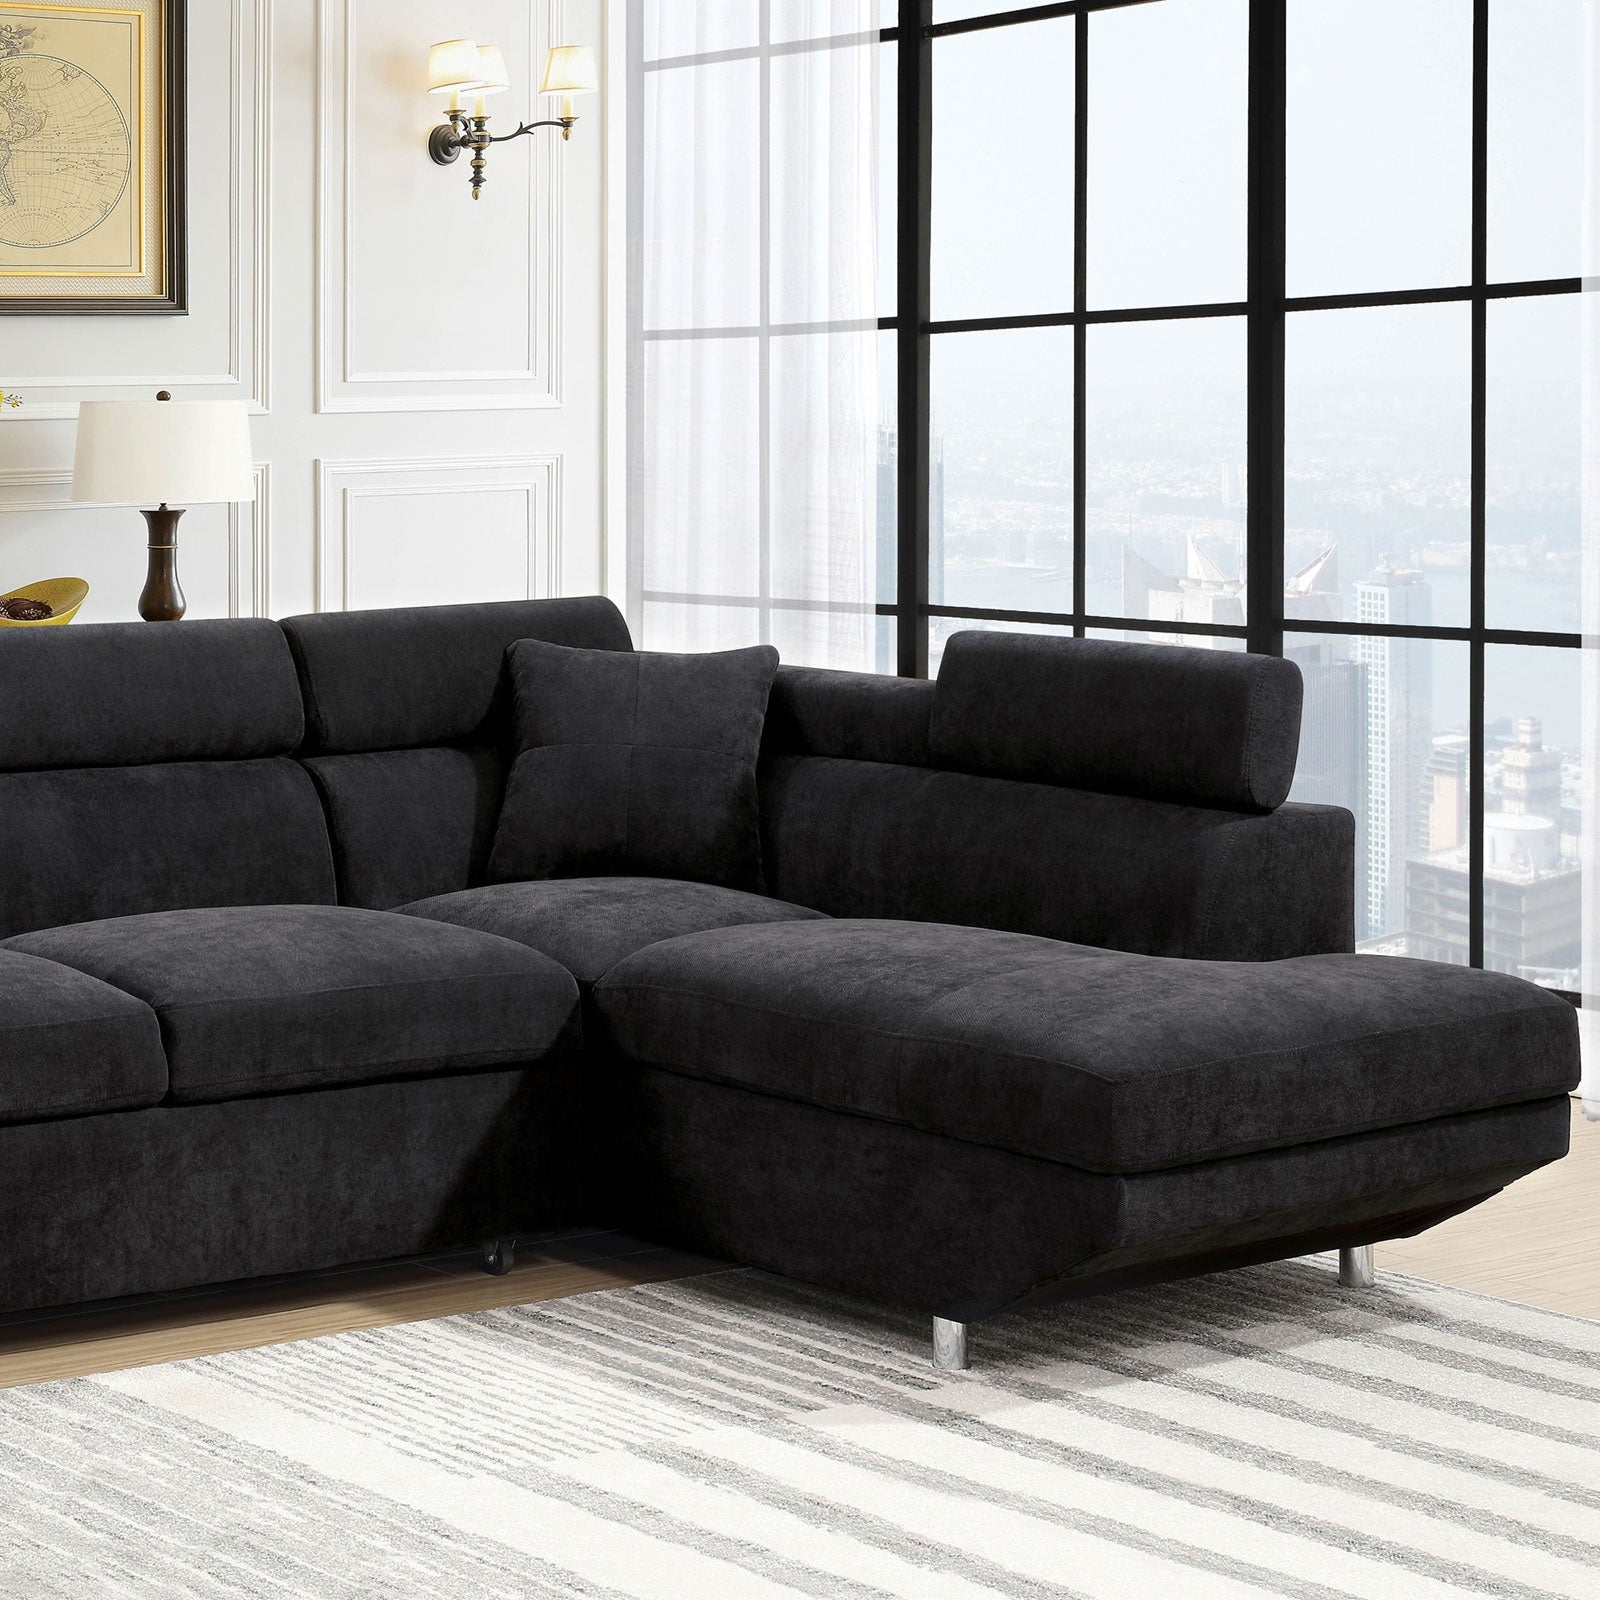 Foreman Plush Black Sectional W- Pull Out Sleeper